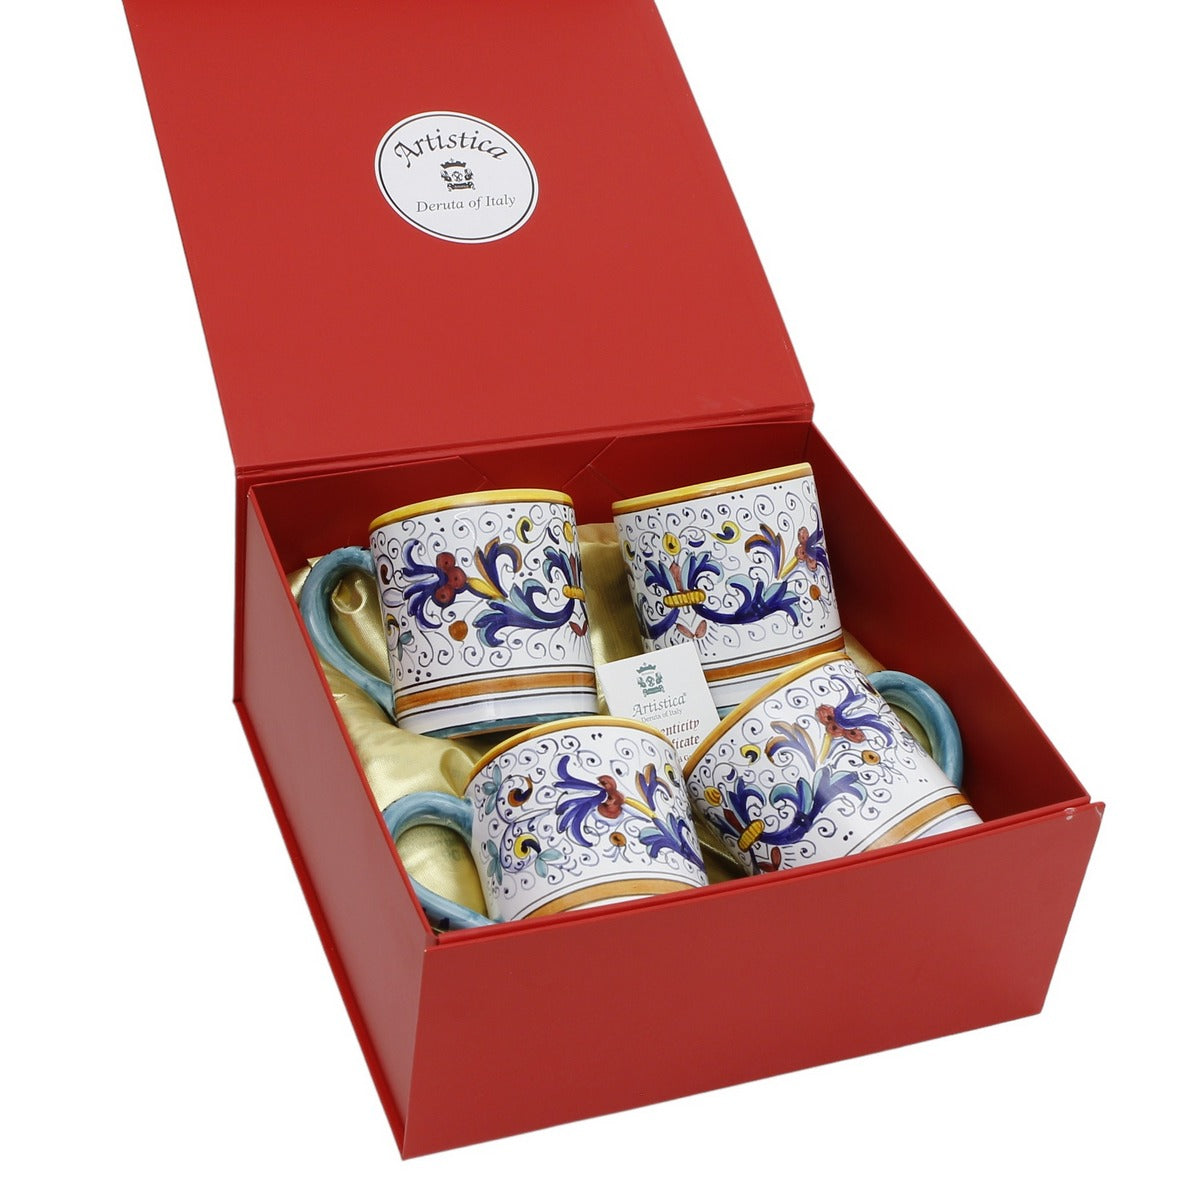 GIFT BOX: DeLuxe Glossy Red Gift Box with Ricco Deruta Mugs 10 Oz. (Set of 4 pcs)